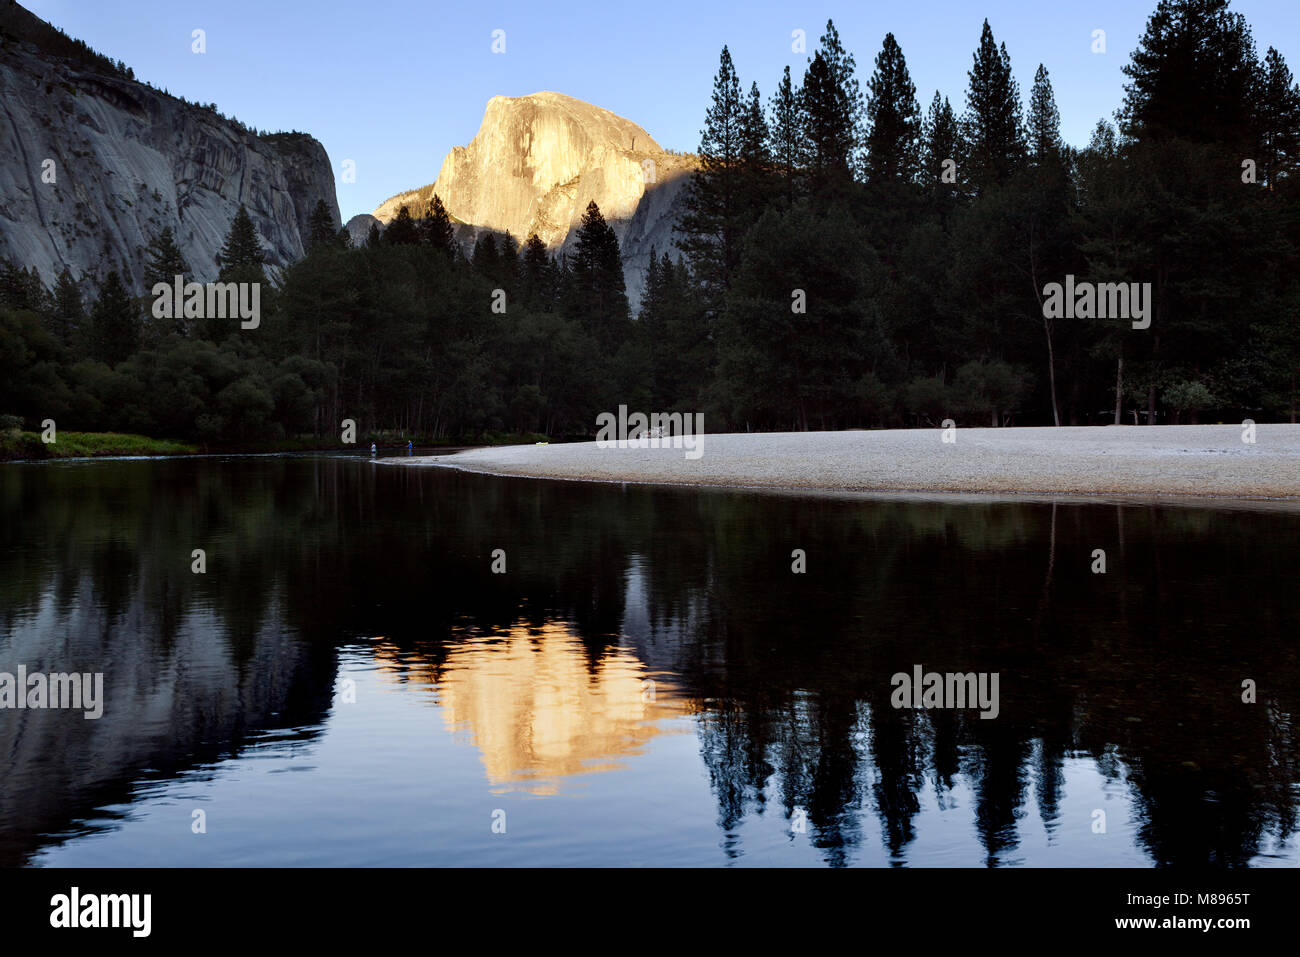 CA02894-00...CALIFORNIA - Sunset on Half Dome reflected on the Merced River in Yosemite National Park. Stock Photo